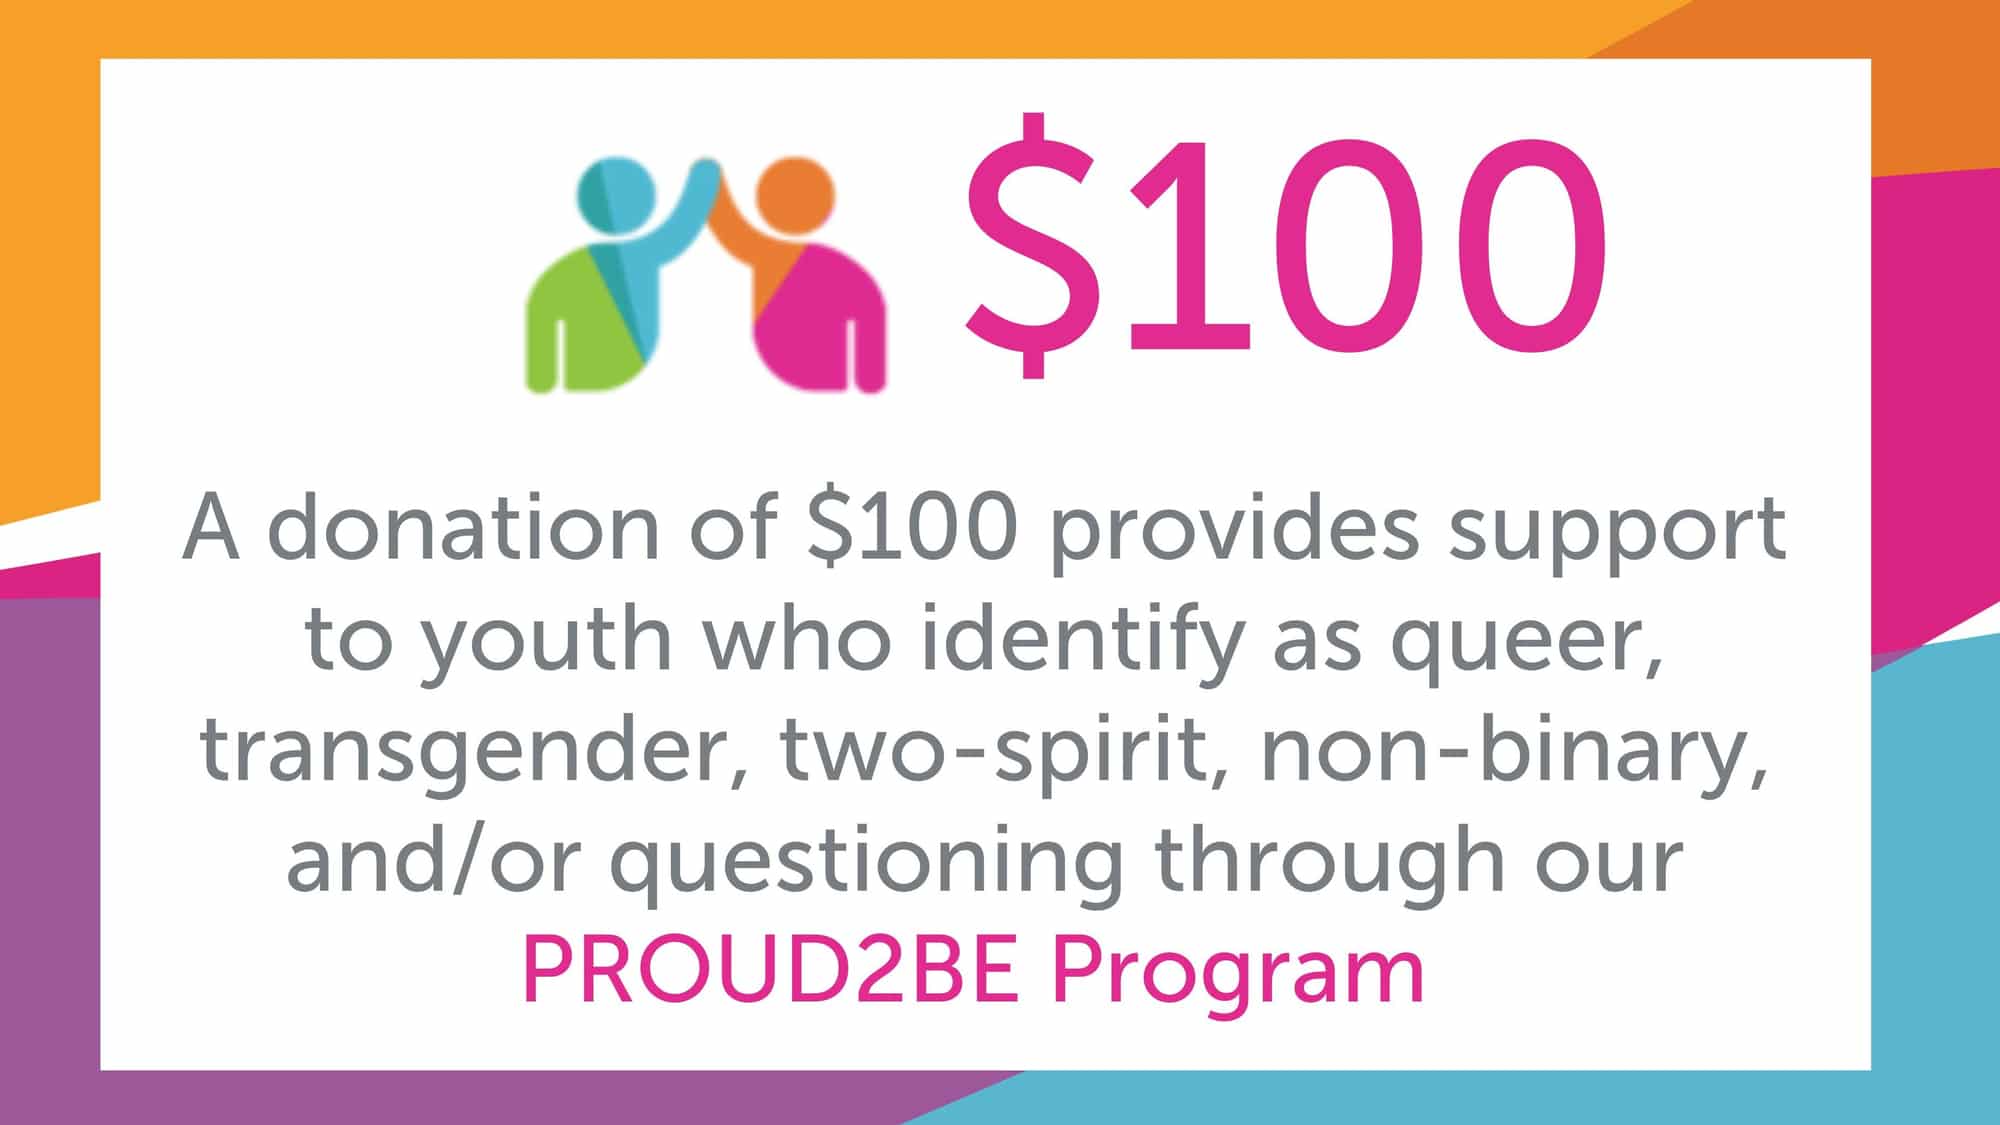 #3 Support our PROUD2BE Program supporting image.